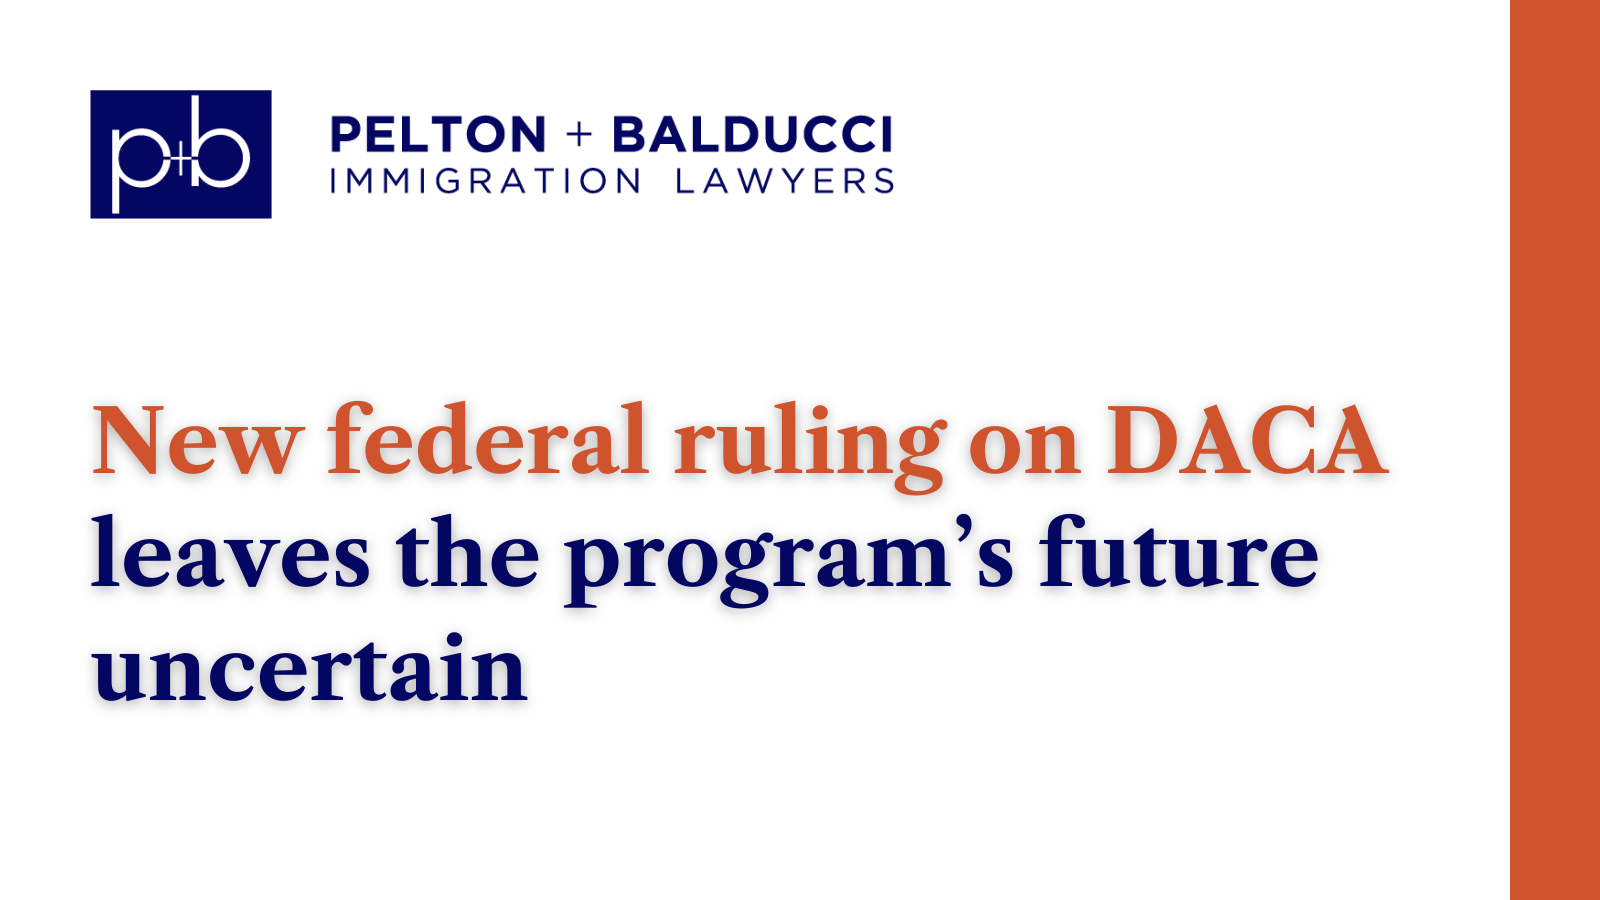 New federal ruling on DACA leaves the program’s future uncertain - New Orleans Immigration Lawyers - Pelton Balducci